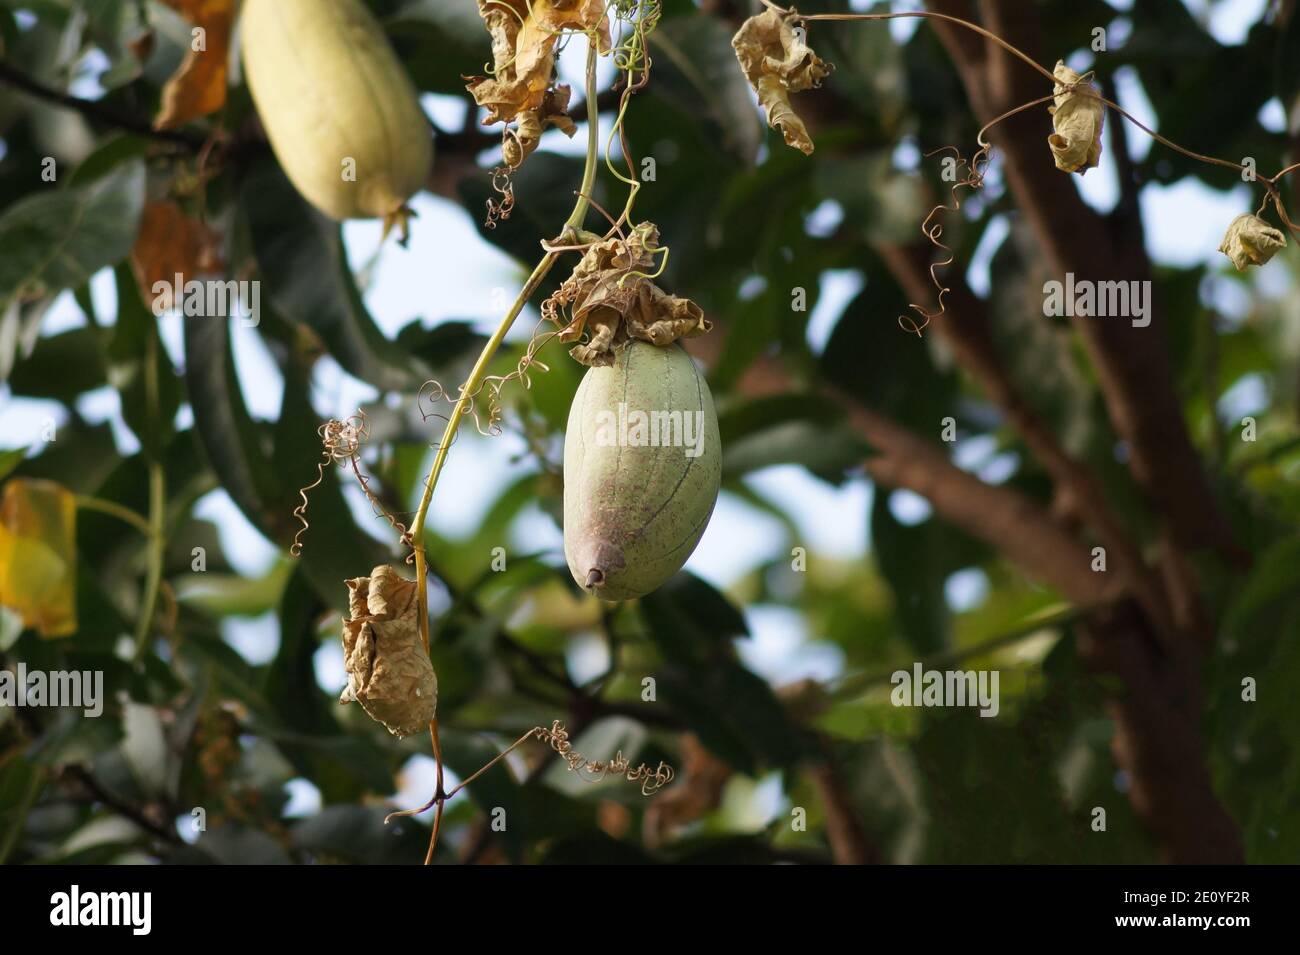 Sponge gourd on the tree. It is a different variety of sponge guard called Luffa or loofah ( Luffa aegyptiaca ). The fully developed fruit is used in Stock Photo